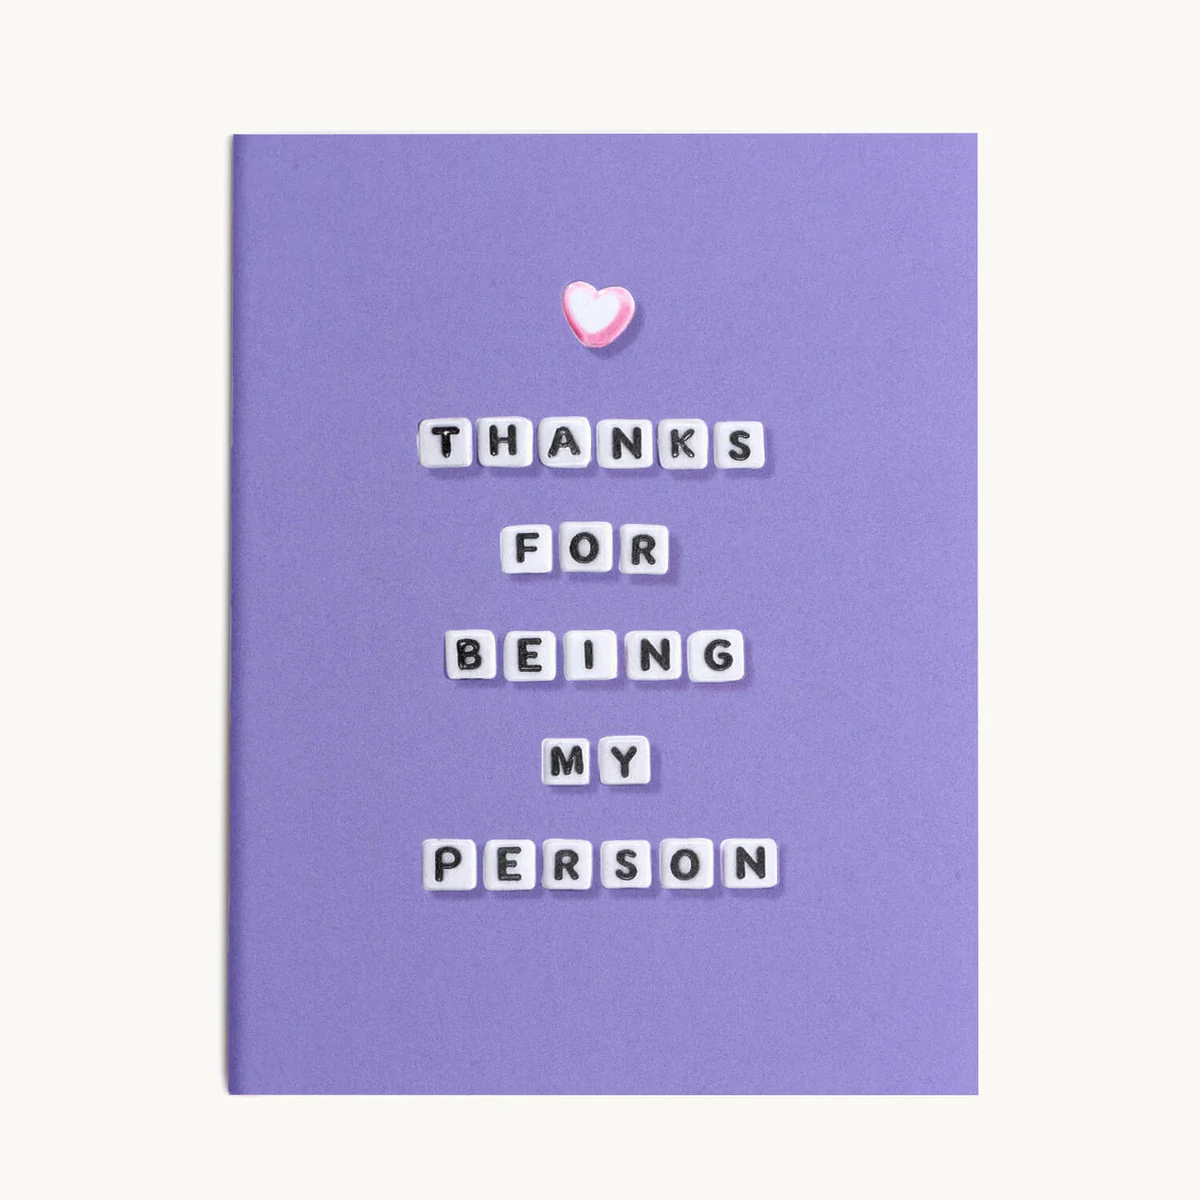 THANKS FOR BEING MY PERSON CARD